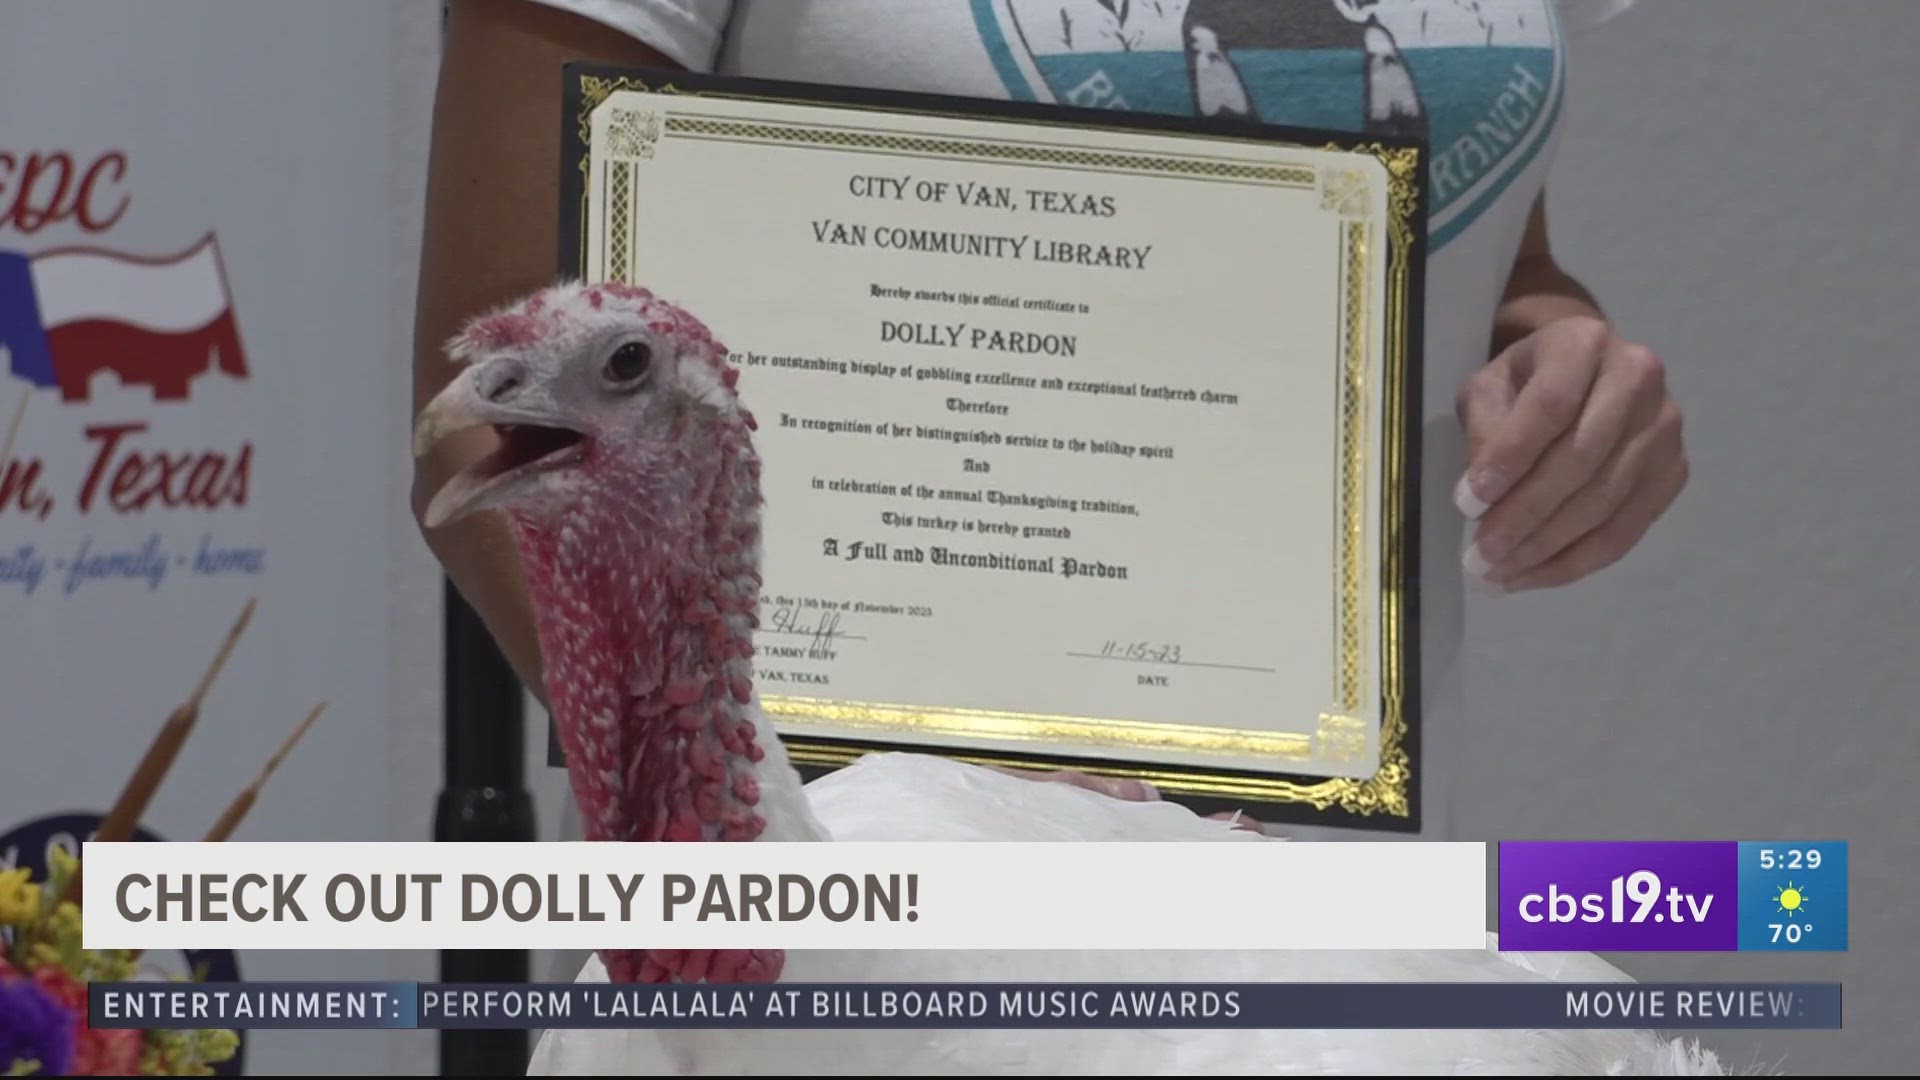 Mayor Tammy Huff officiated the event with the first turkey ambassador, Dolly Pardon. She will promote literacy and goodwill for this Thanksgiving season.